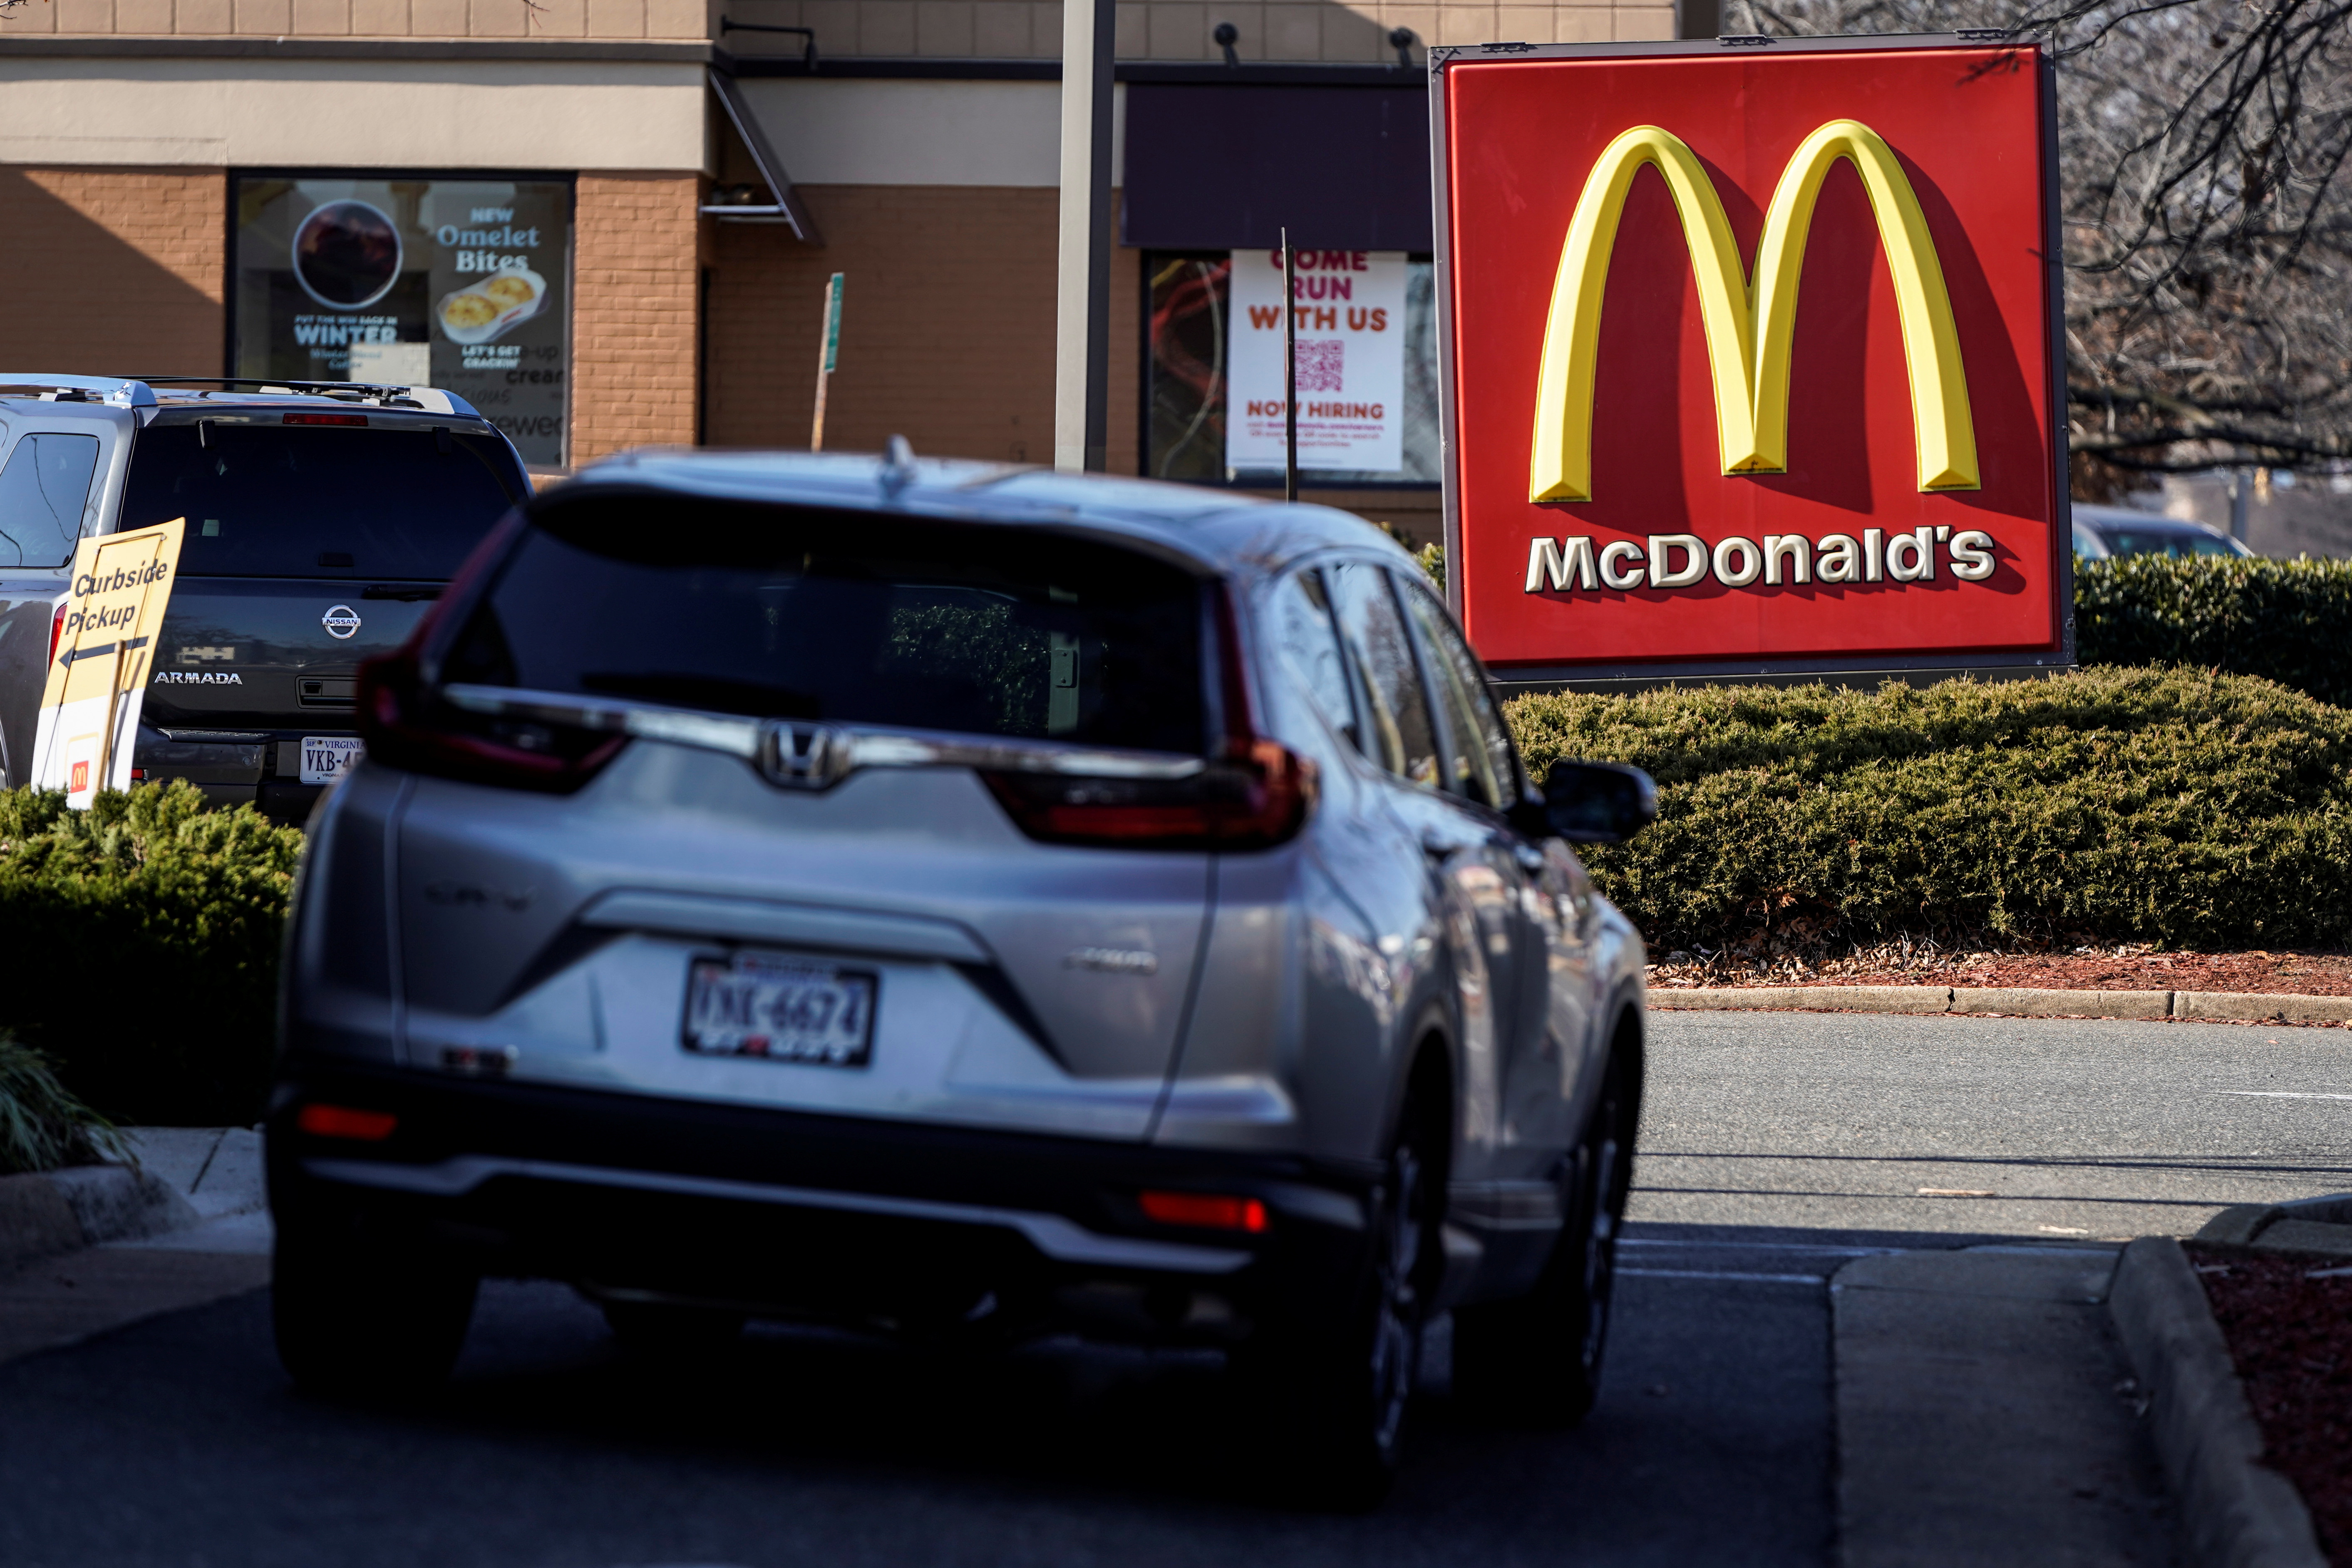 McDonald's Corp. reports fourth quarter earnings